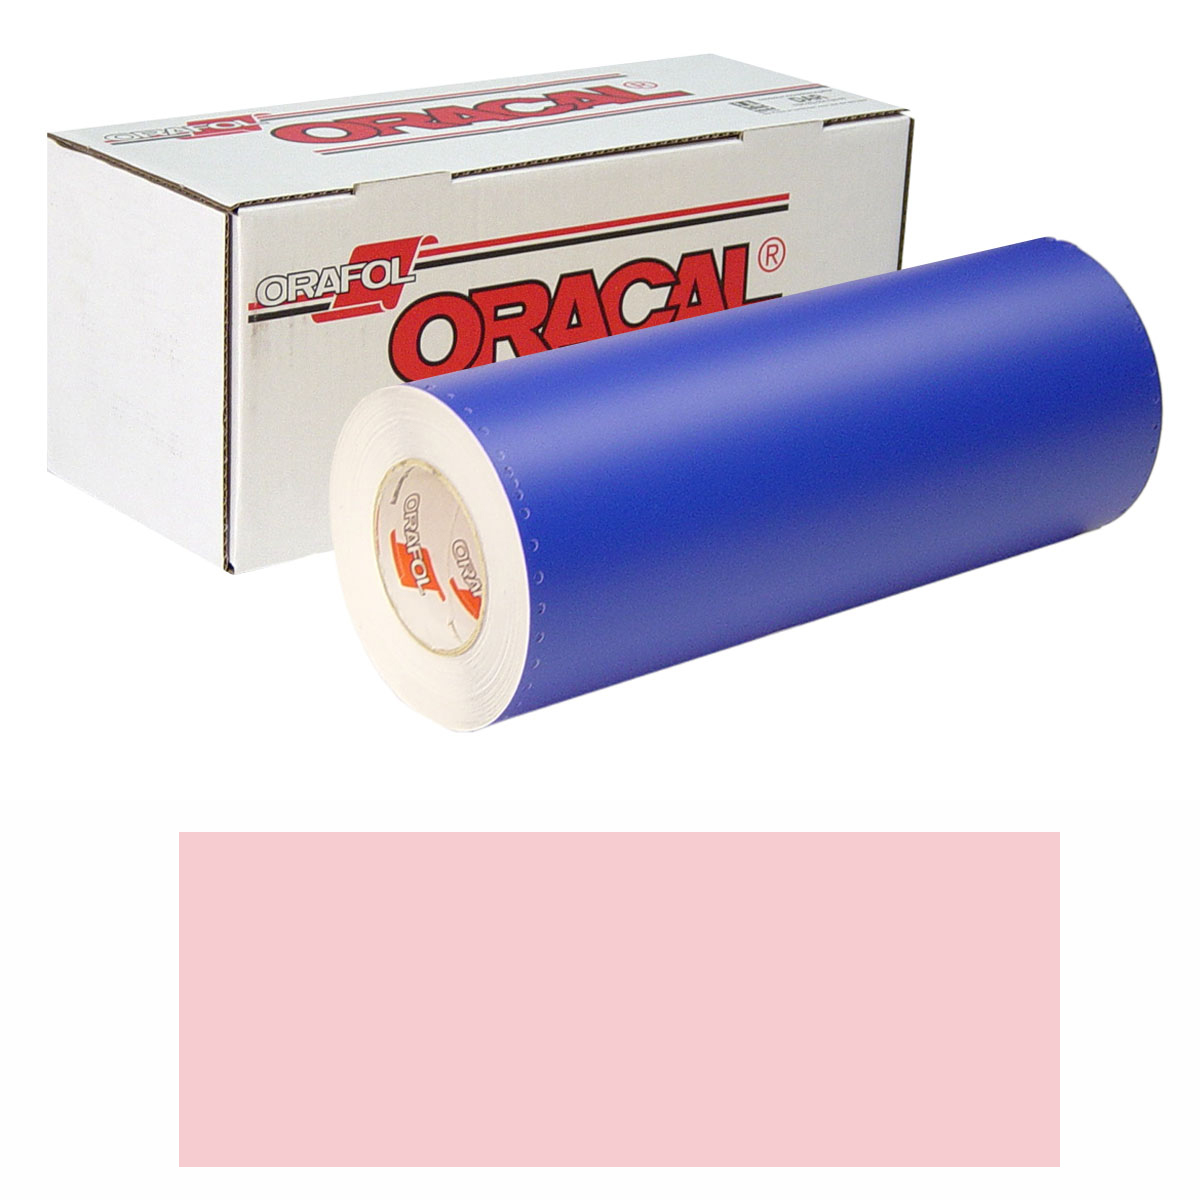 ORACAL 8300 30in X 50yd 085 Pale-Pink